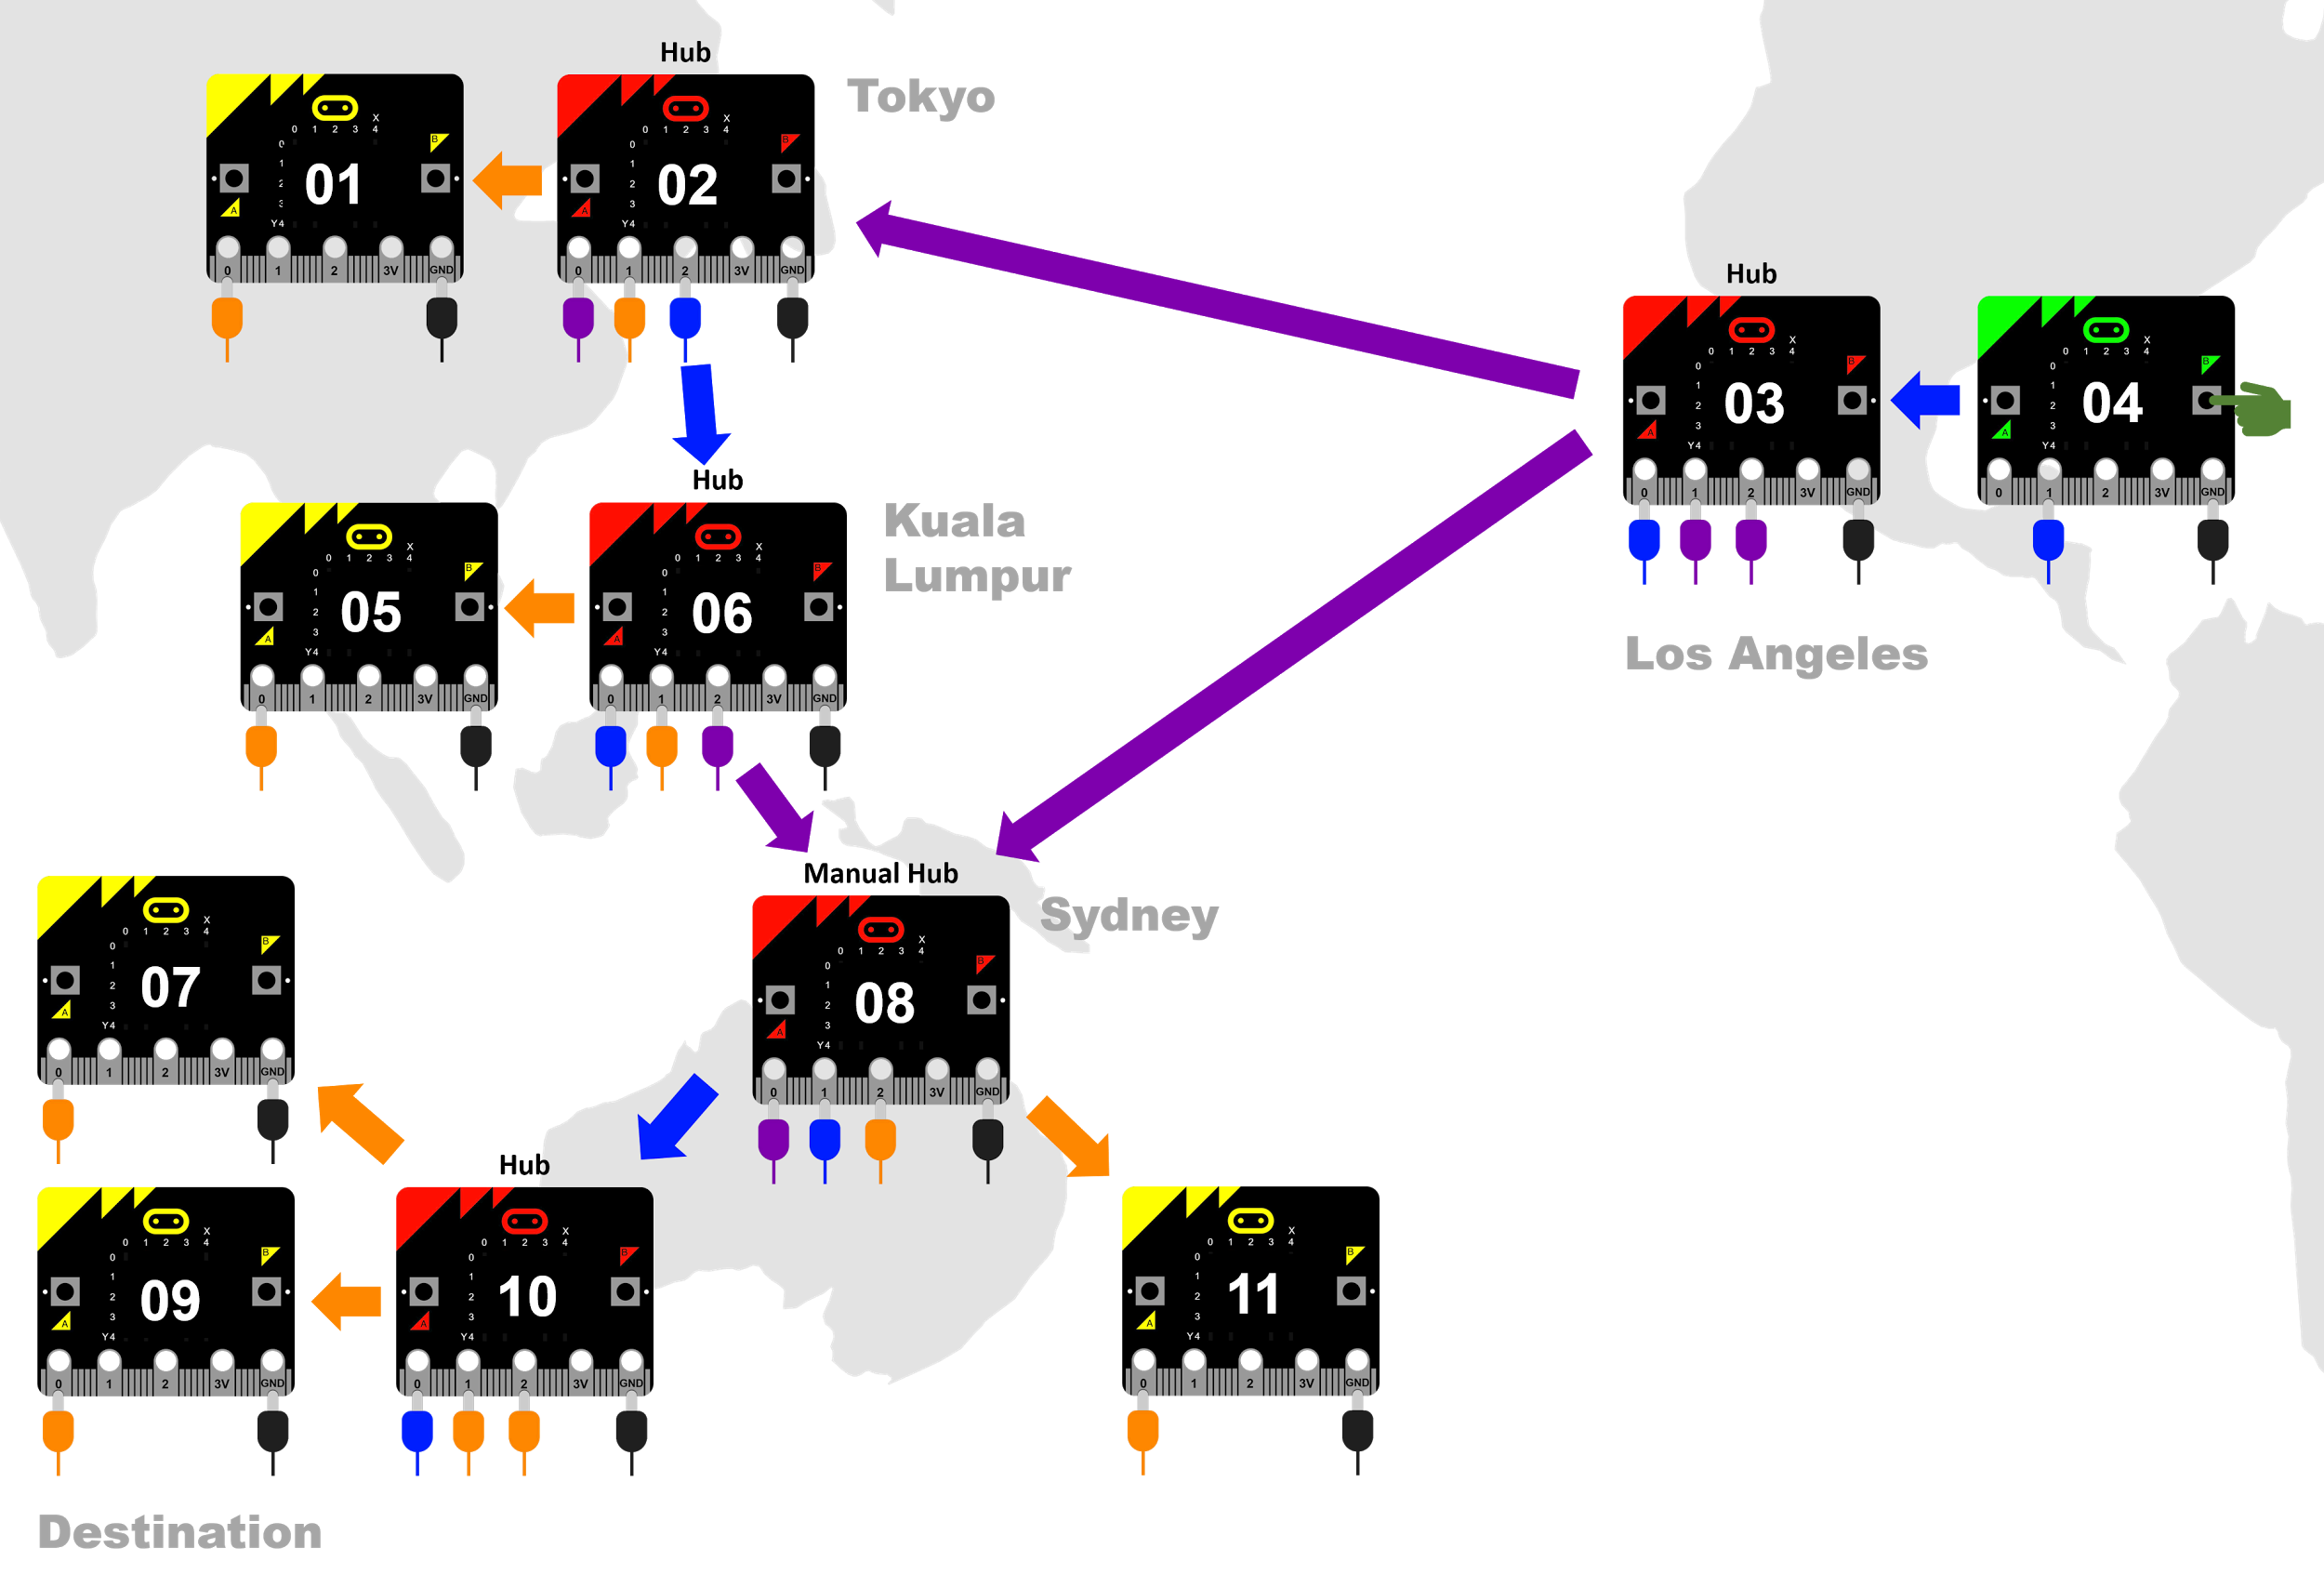 Diagram of eleven micro:bits connected together in Japan, Malaysia, Australia and the USA. Device 4 is green. It is the transmitter. Button B on the device is being pressed. It has a blue cable on Pin 1 and a black cable on the GND pin. It has a blue arrow pointing to Device 3, a Hub. Device 3 is a hub. It is red. It transmits to Device 2, which is labelled hub; and Device 8, which is labelled manual hub. Device 3 has a blue cable on the 0 pin; two purple cables on the 1 and 2 pins and a black cable on the GND pin. Device 2 is a hub. It is red. It has an orange arrow pointing to Device 1 and a blue arrow pointing to Device 6, a hub. Device 1 is yellow. It has an orange cable on Pin 1 and a black cable on the GND pin. Device 6 is a hub. It is red. It has an orange arrow pointing to device 5 and a purple arrow pointing to device 8, which is a manual hub. It has a blue cable on Pin 0, an orange cable on Pin 1, a purple cable on Pin 2 and a black cable on the GND pin. Device 5 is yellow. It has an orange cable on Pin 0 and a black cable on the GND pin. Device 8 is a hub. It is red. It has a blue arrow pointing to Device 10, a hub, and an orange arrow pointing to Device 11. It has a purple cable on Pin 0, a blue cable on Pin 1, an orange cable on Pin 2 and a black cable on the GND pin. Device 11 is yellow. It has an orange cable on Pin 0 and a black cable on the GND pin. Device 10 is a hub. It is red. It has a blue cable on Pin 0, orange cables on pins 1 and 2, and a black cable on the GND pin. Orange arrows point to Devices 7 and 9. Devices 7 and 9 are yellow. They both have an orange cable on Pin 0 and a black cable on the GND pins.